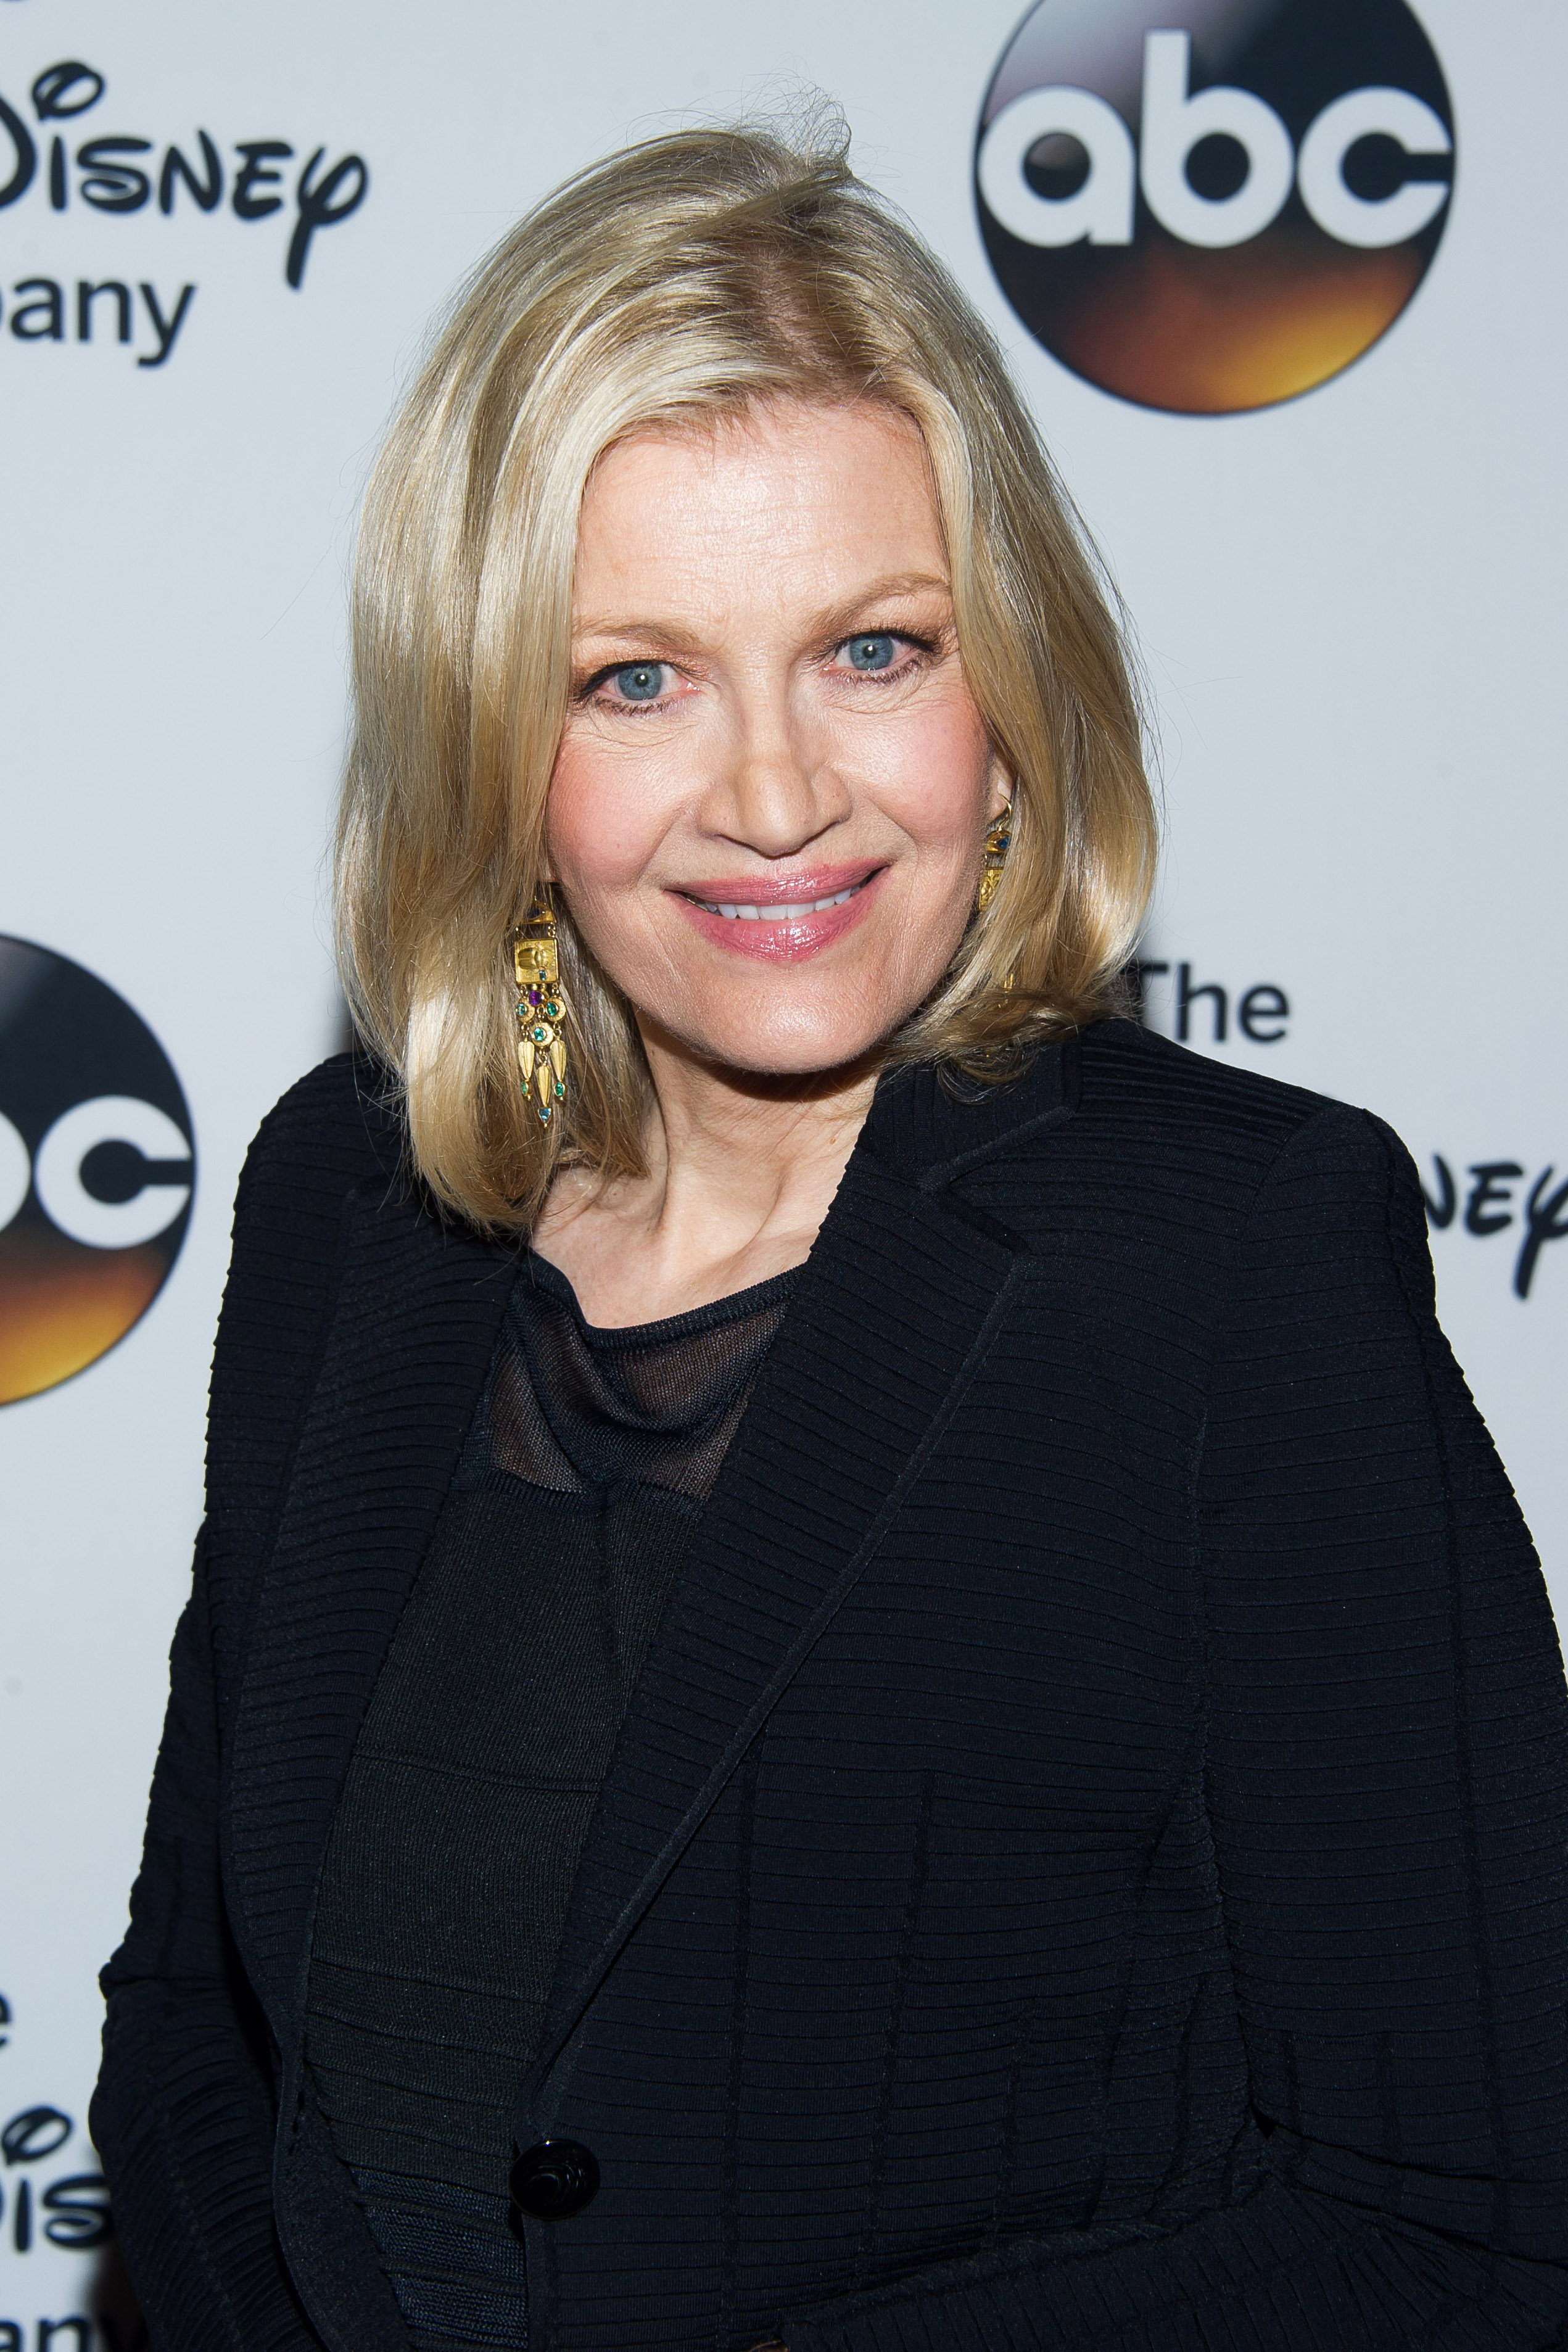 Diane Sawyer attends 'A Celebration of Barbara Walters' in New York City on May 14, 2014. (Charles Sykes—AP)